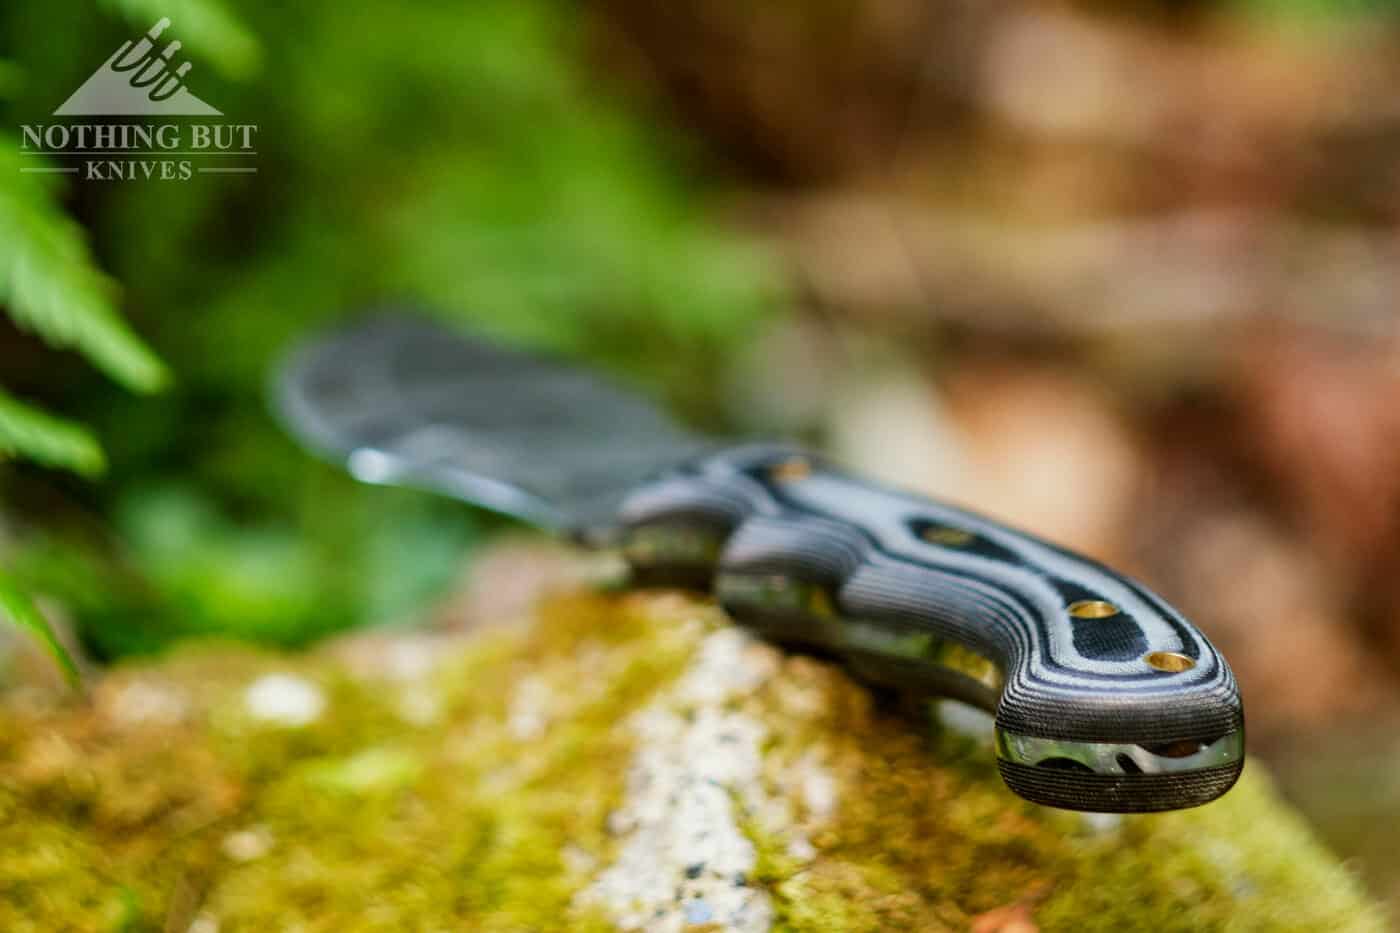 The Wood Handle of The Ironside Tracker is ergonomic and practical, but a little slick when wet. 